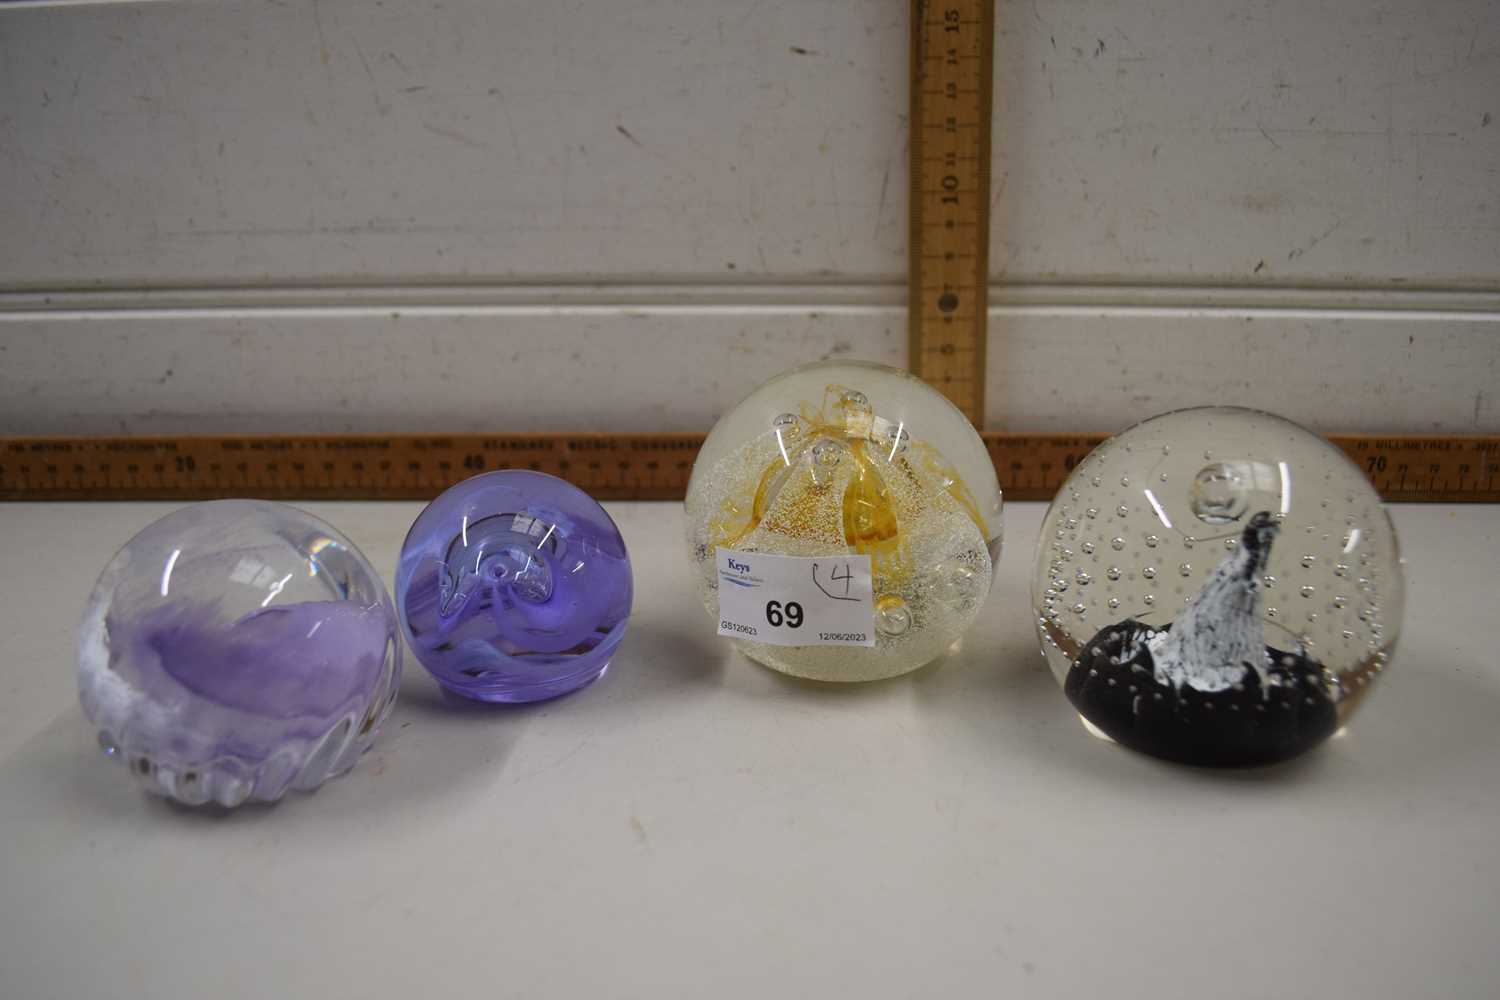 Four Caithness paperweights, Starlight, Moon Crystal, Misty and Congratulations